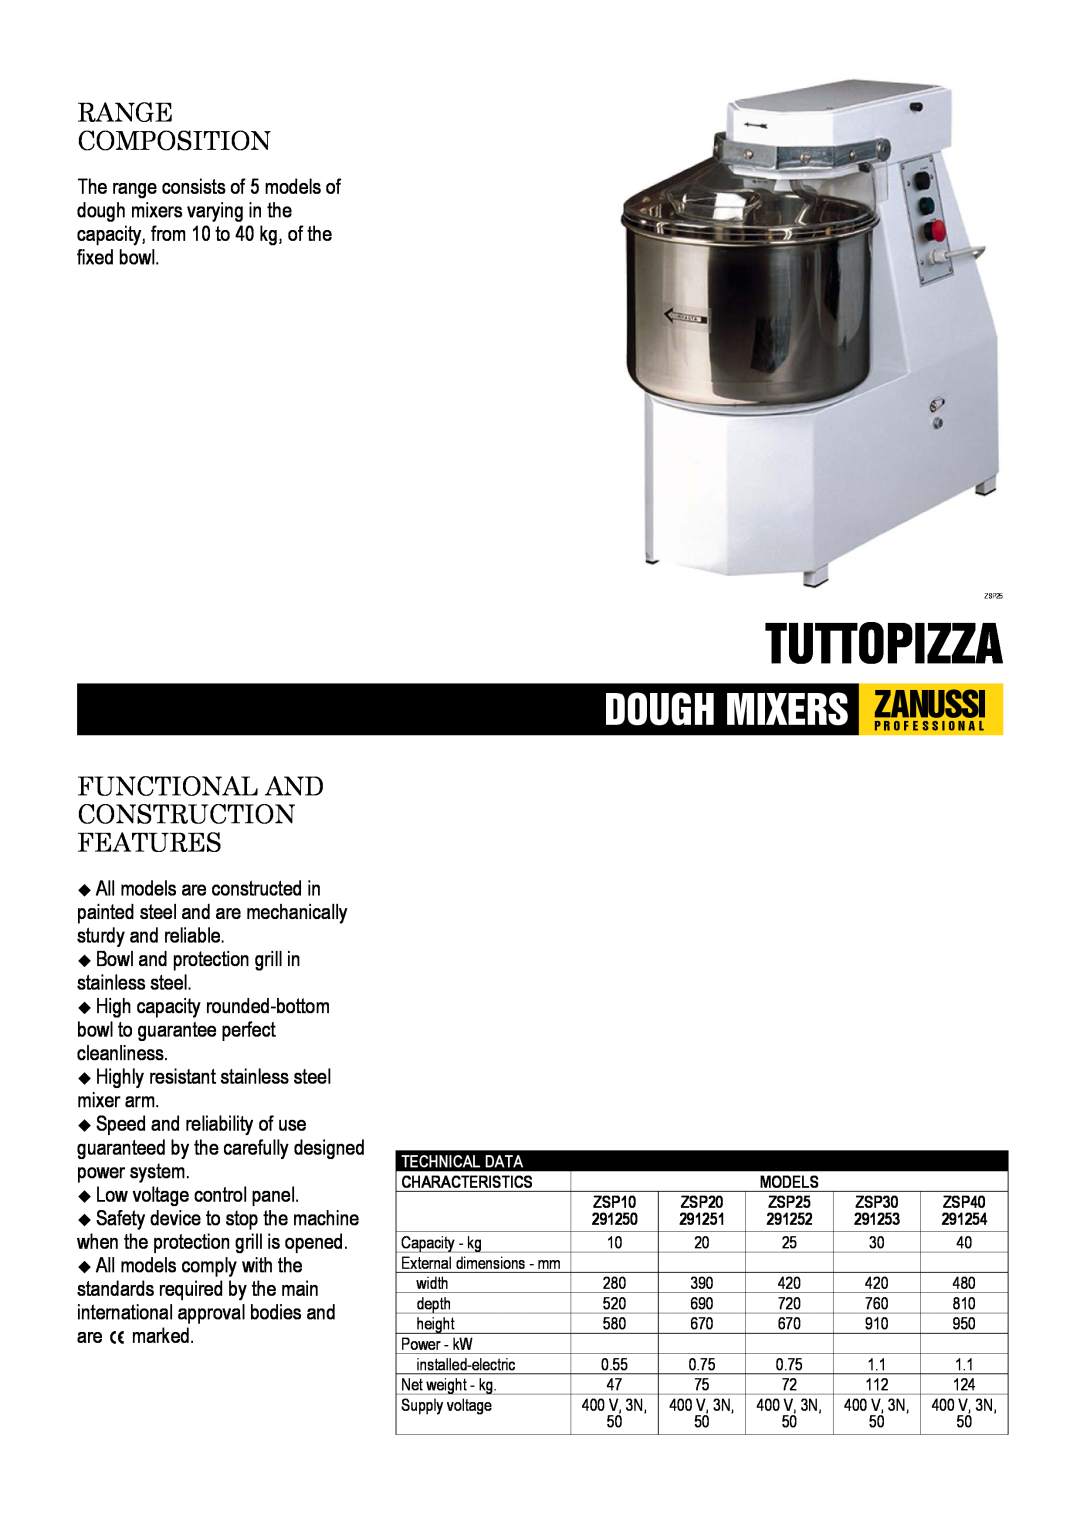 Zanussi ZSP10, ZSP25, ZSP20, ZSP40, ZSP30 dimensions Tuttopizza, Range Composition, Functional And Construction Features 